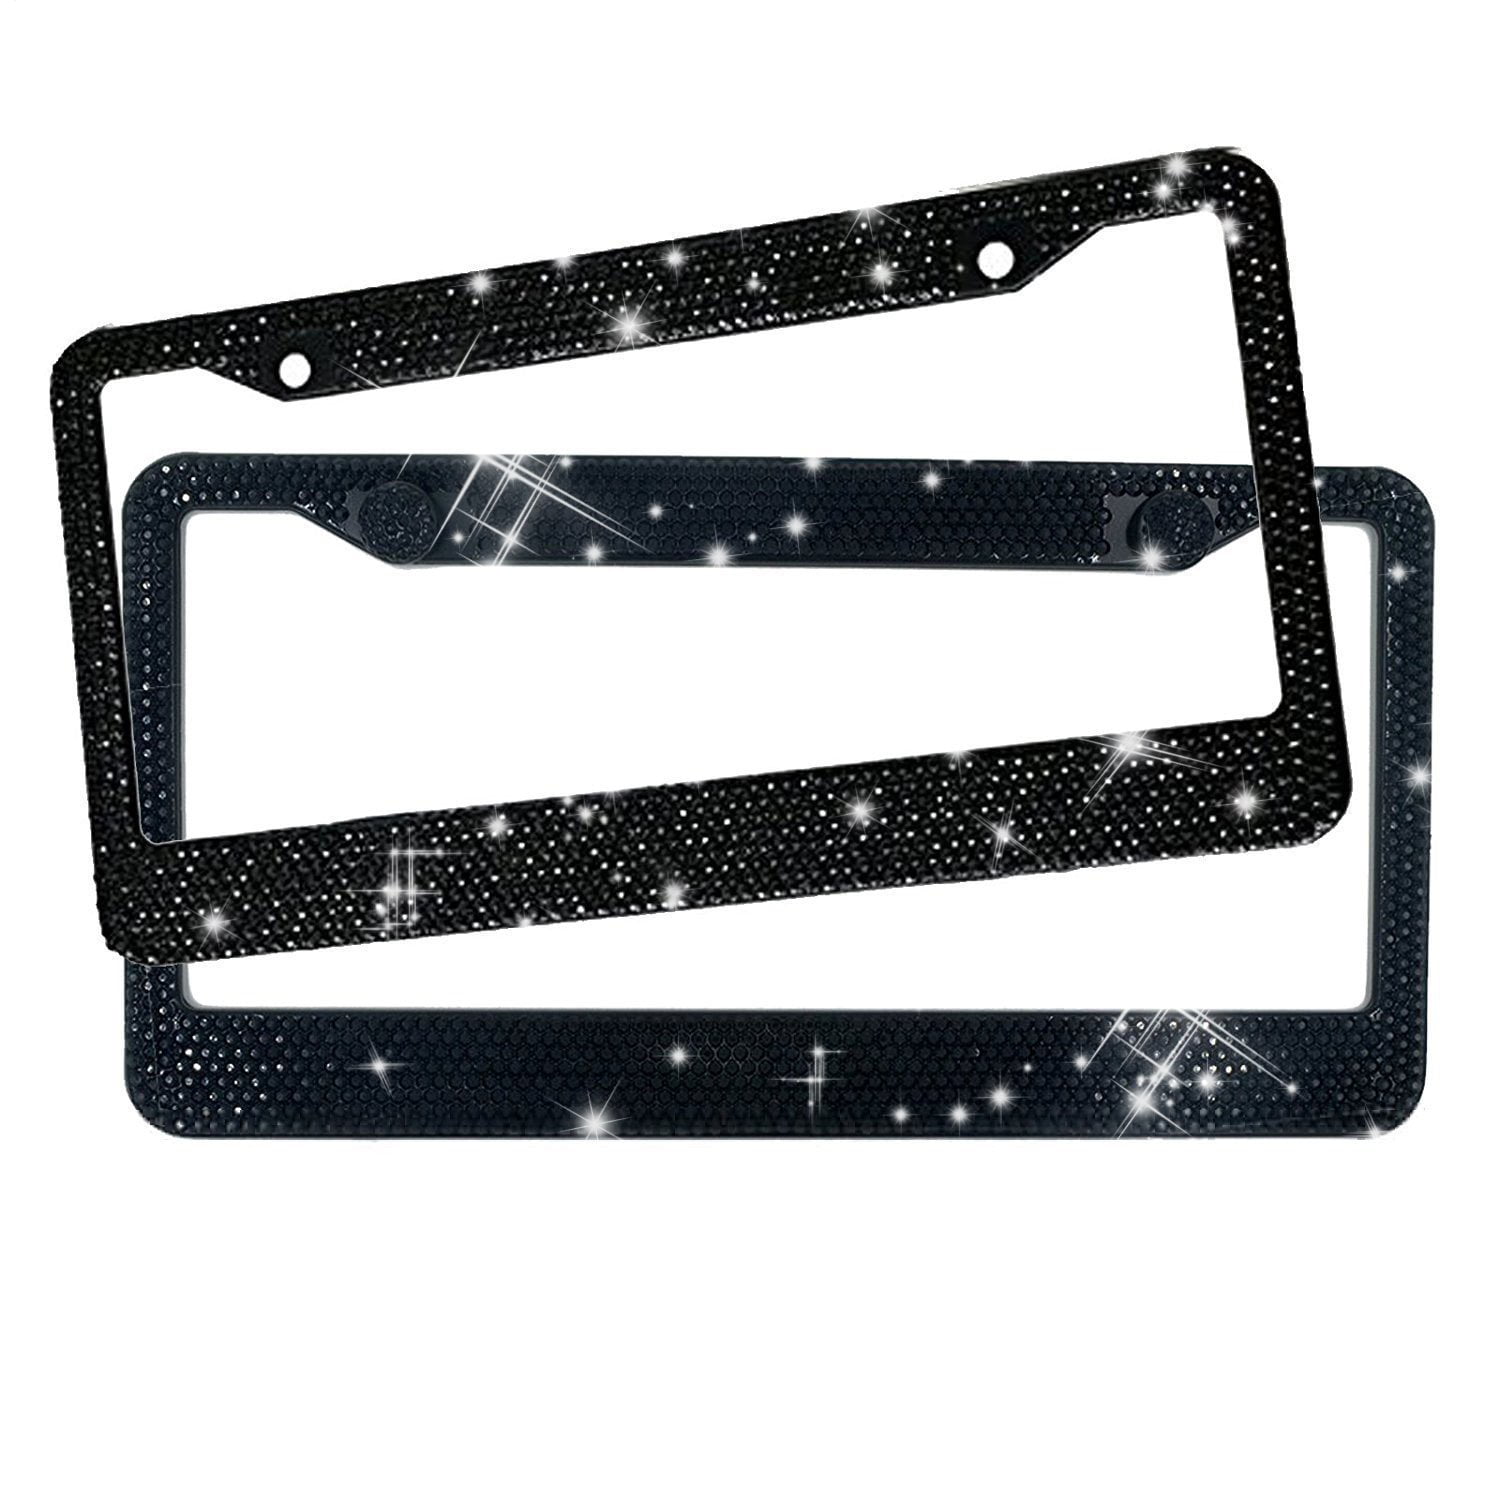 2x MERCEDES-BENZ STAINLESS Steel License Plate Frame w//screw Caps  LL